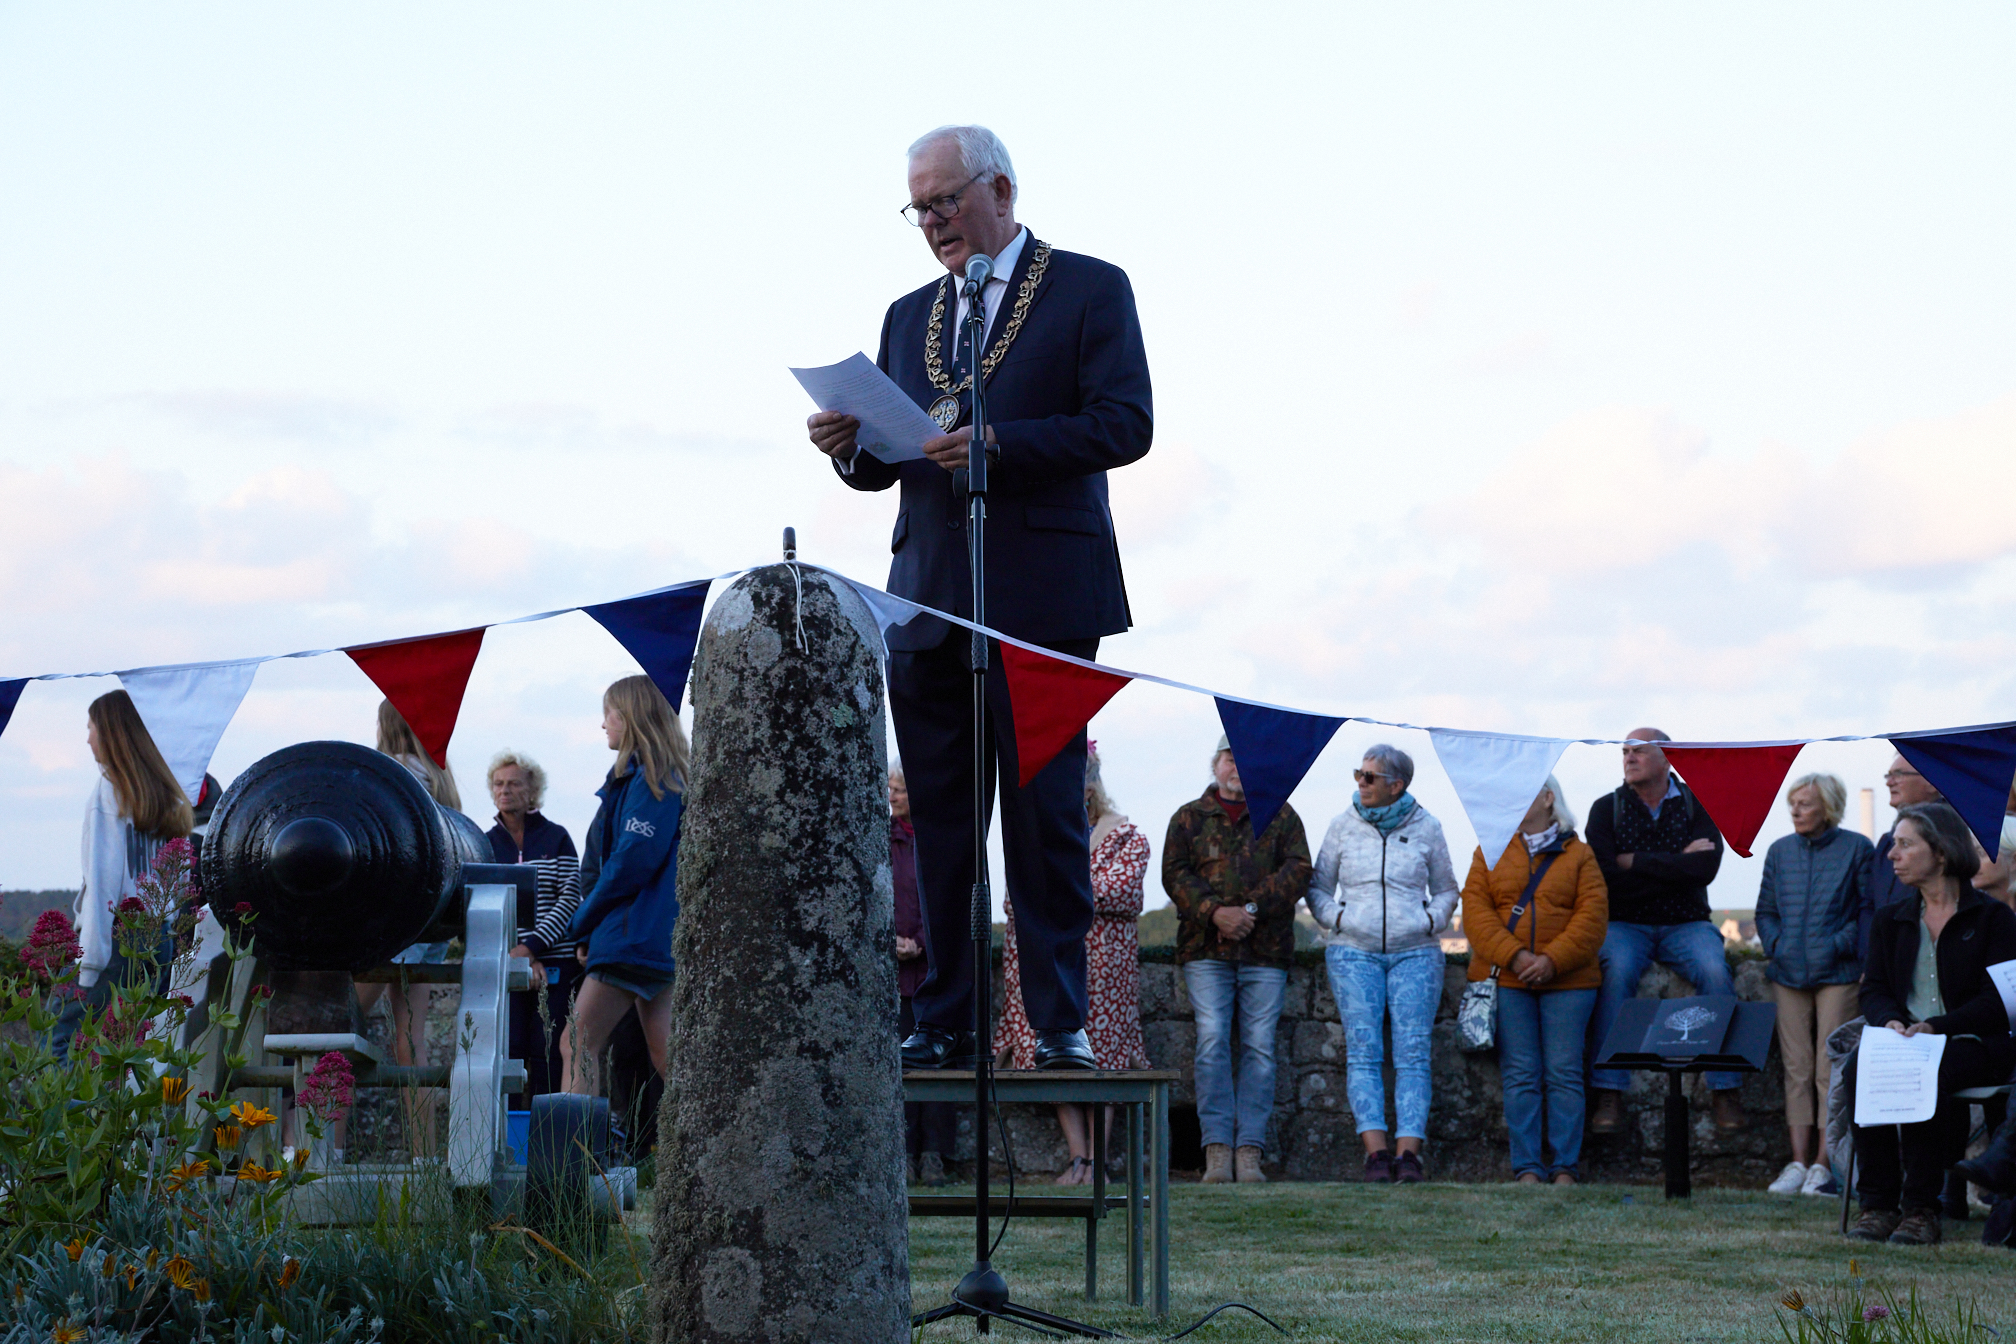 Photo of Cllr Robert Francis, Chairman of the Council of the Isles of Scilly reading the Proclamation at the D-Day 80th Anniversary commemoration ceremony in the garden at Hugh House, which overlooks Hugh Town, St Mary's. 